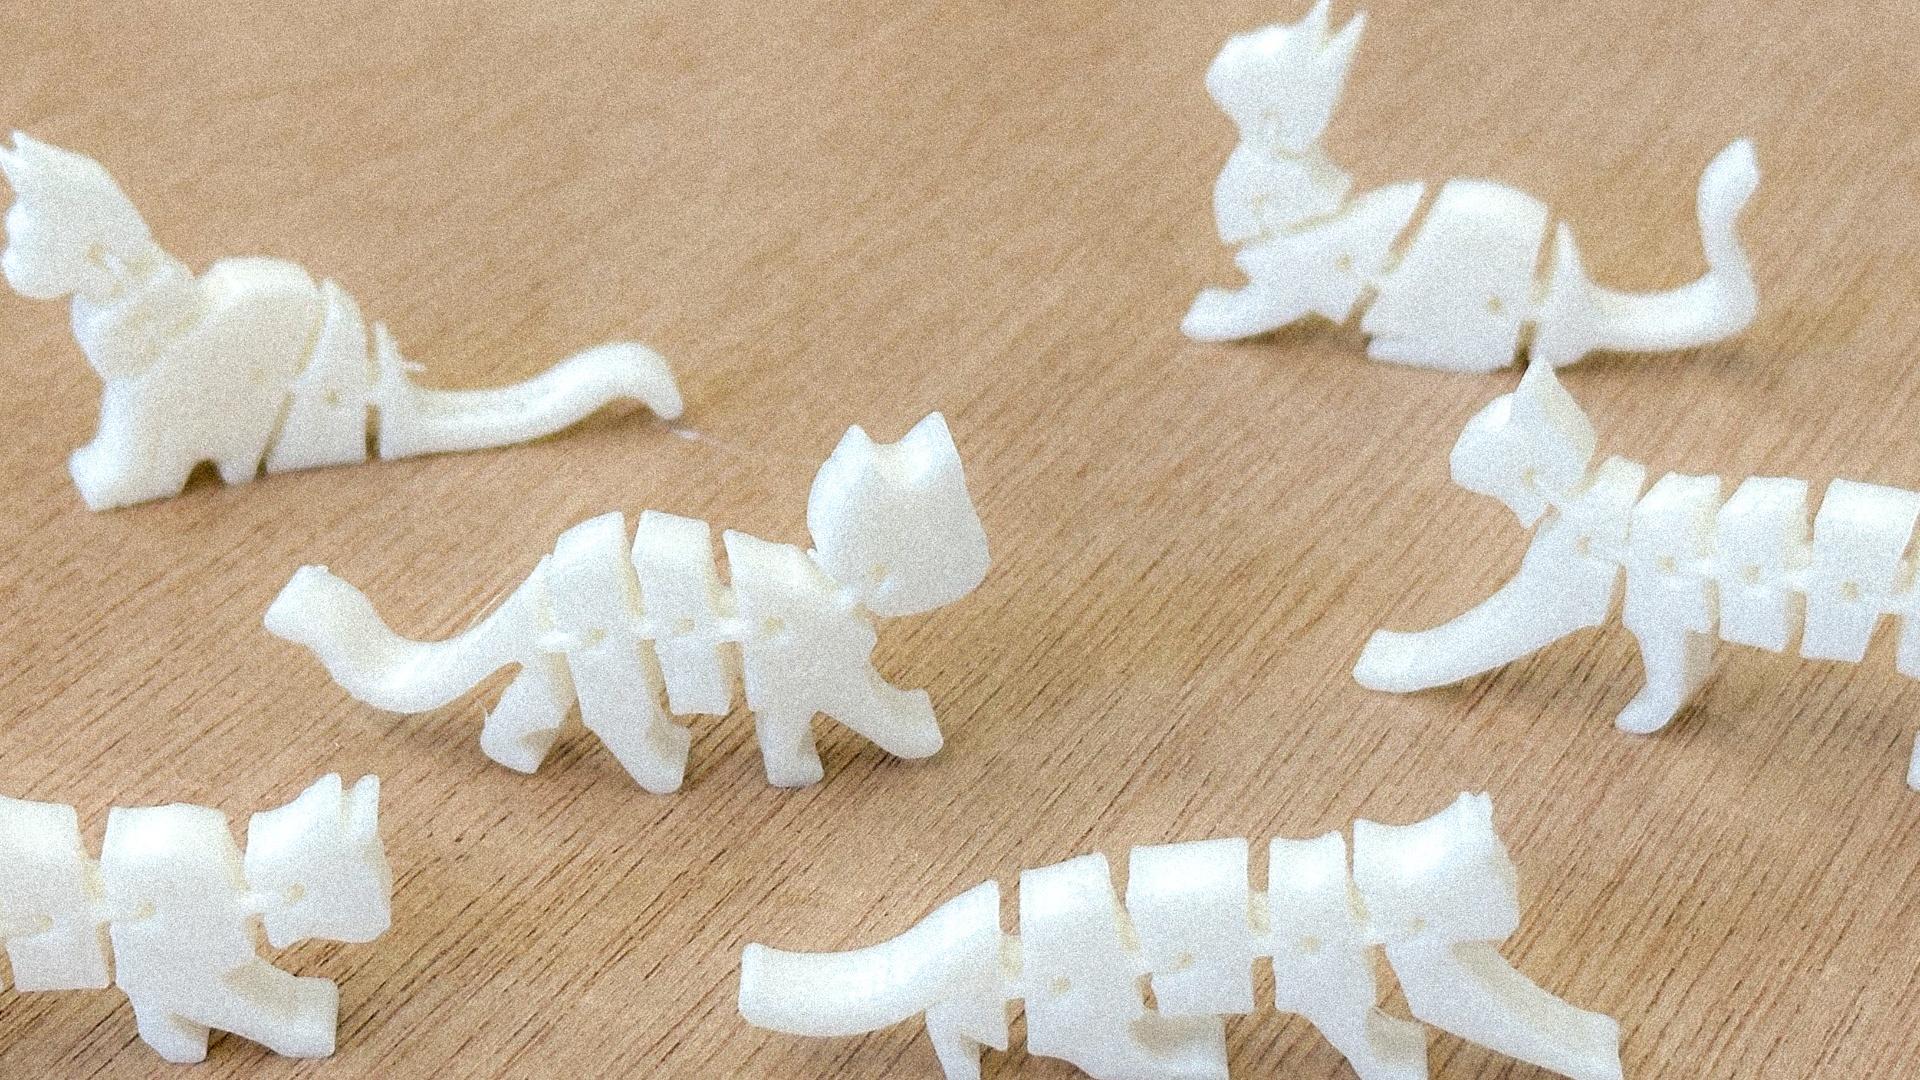 6-in-1 Flexi Articulated Cat Collection (Print in place) 3d model